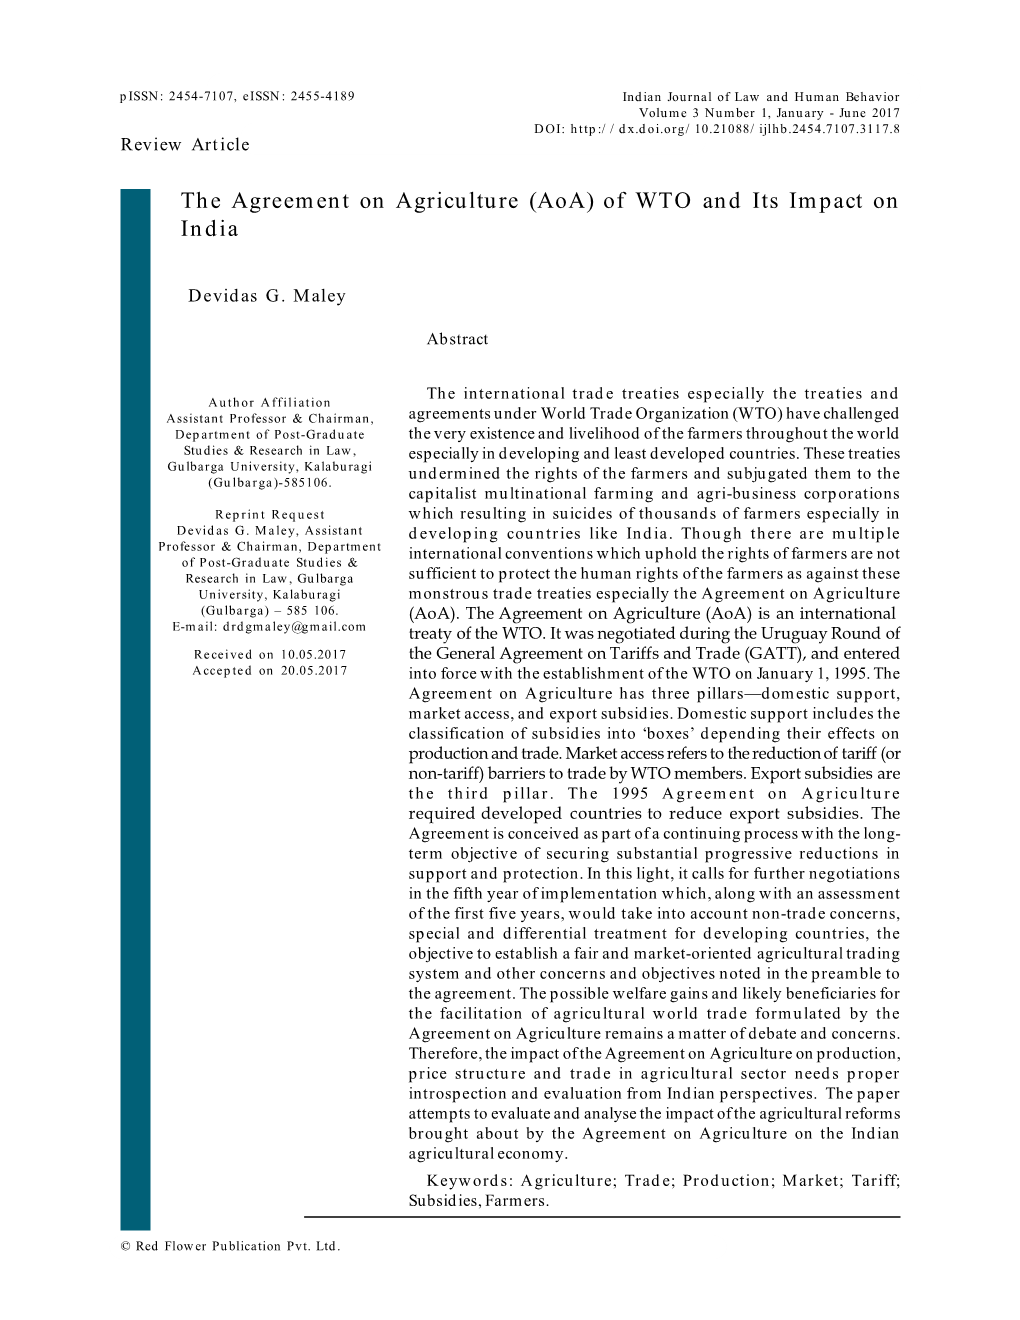 The Agreement on Agriculture (Aoa) of WTO and Its Impact on India